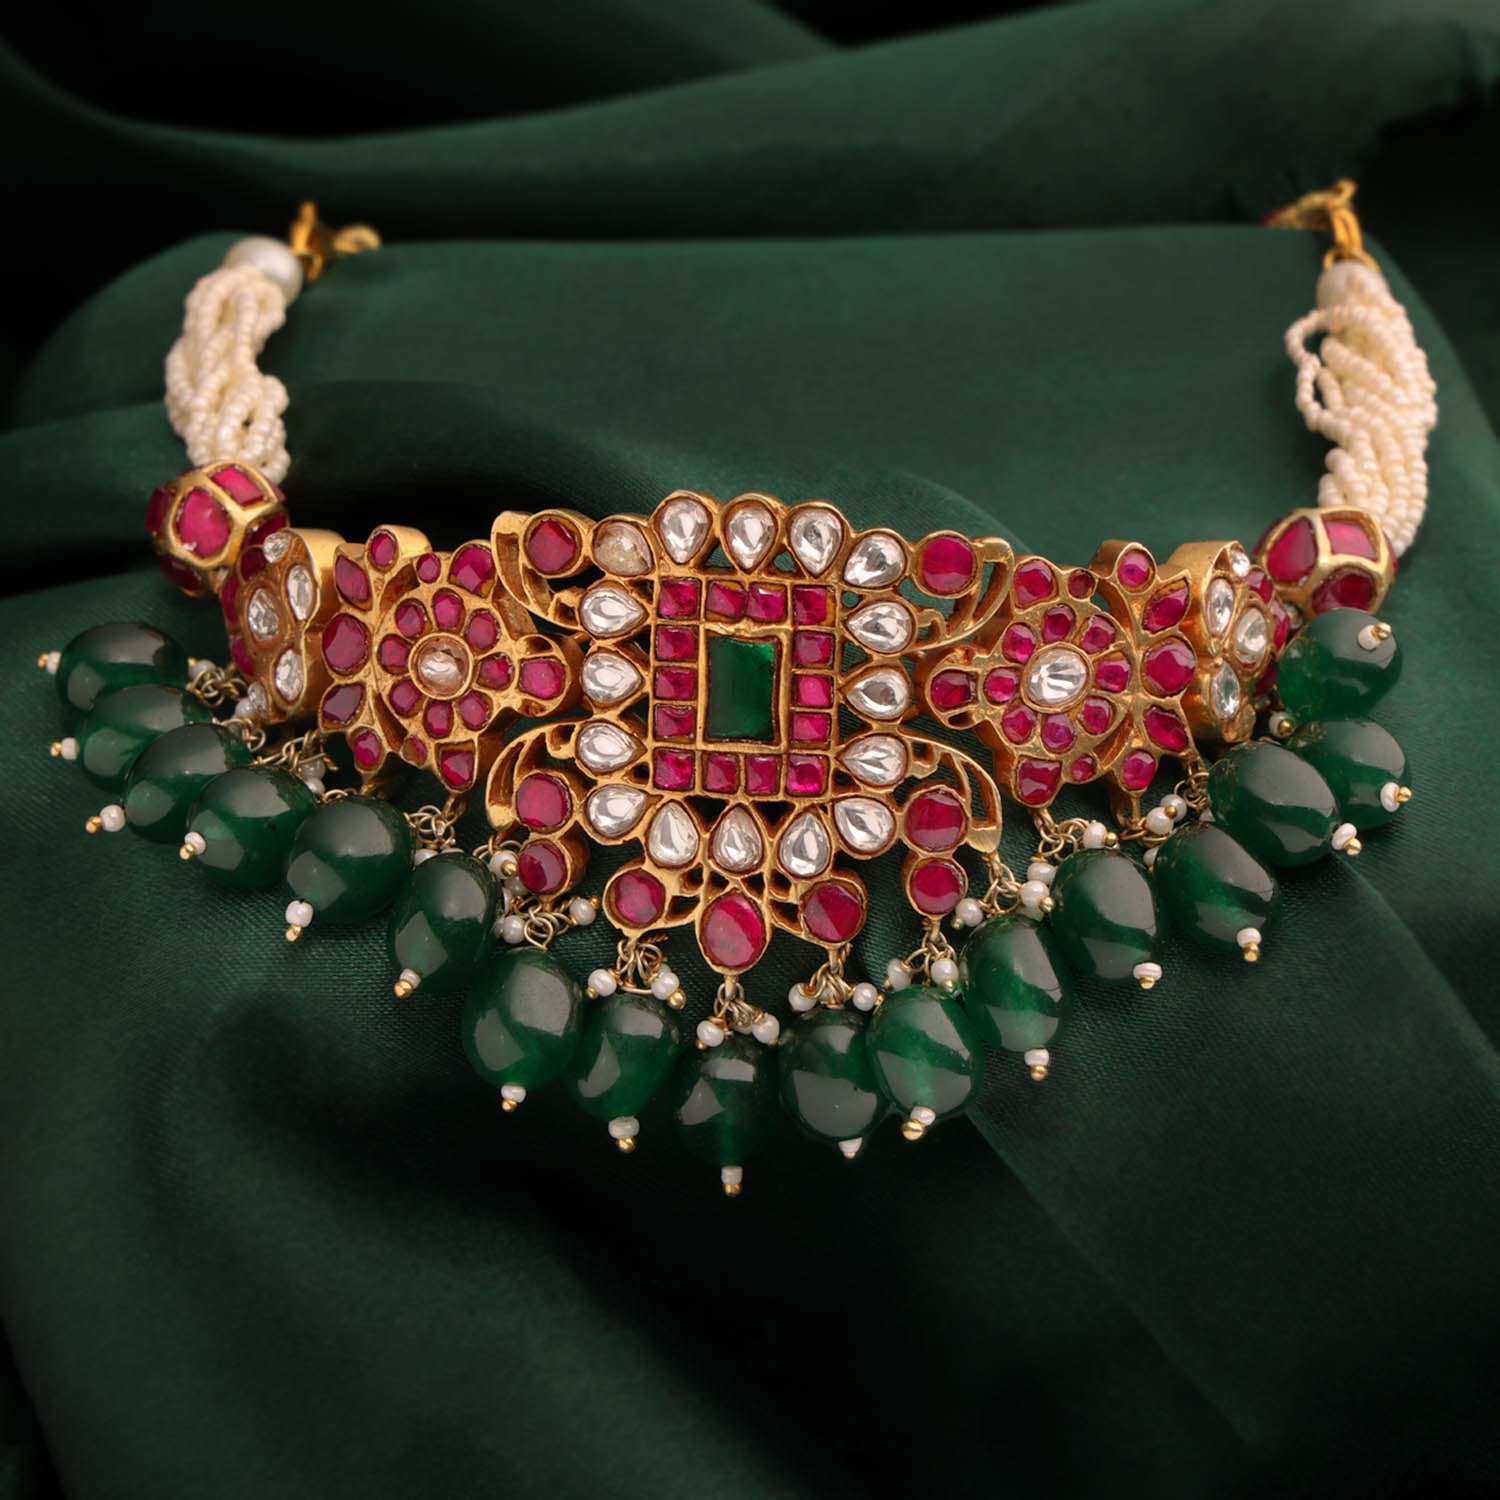 Royal Red and Green Elegance Choker Necklace | SKU : 0018463446